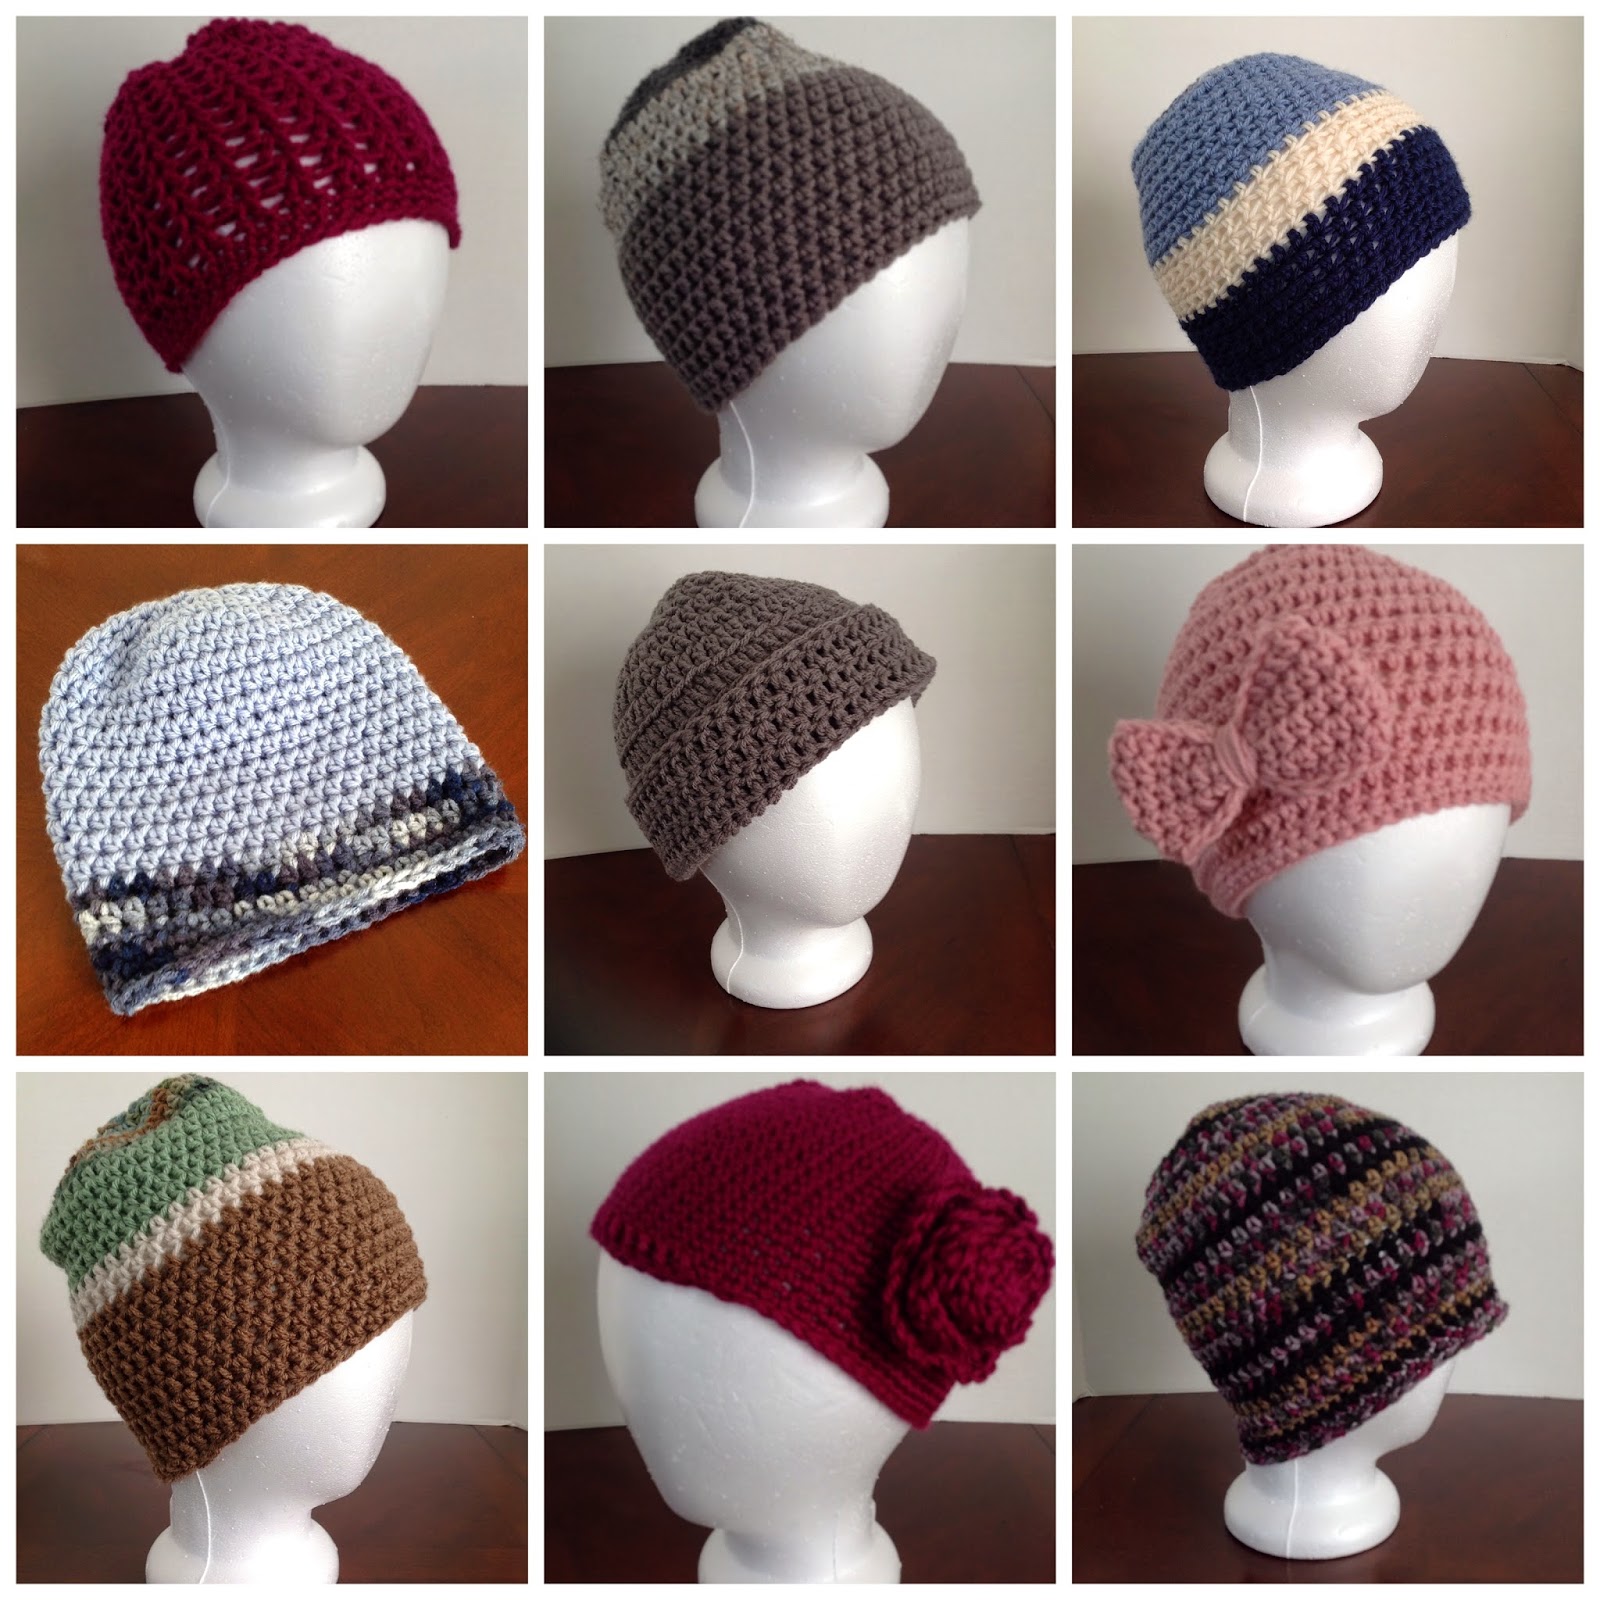 Knotted Threads and Yarn: Hats, Hats, and More Hats